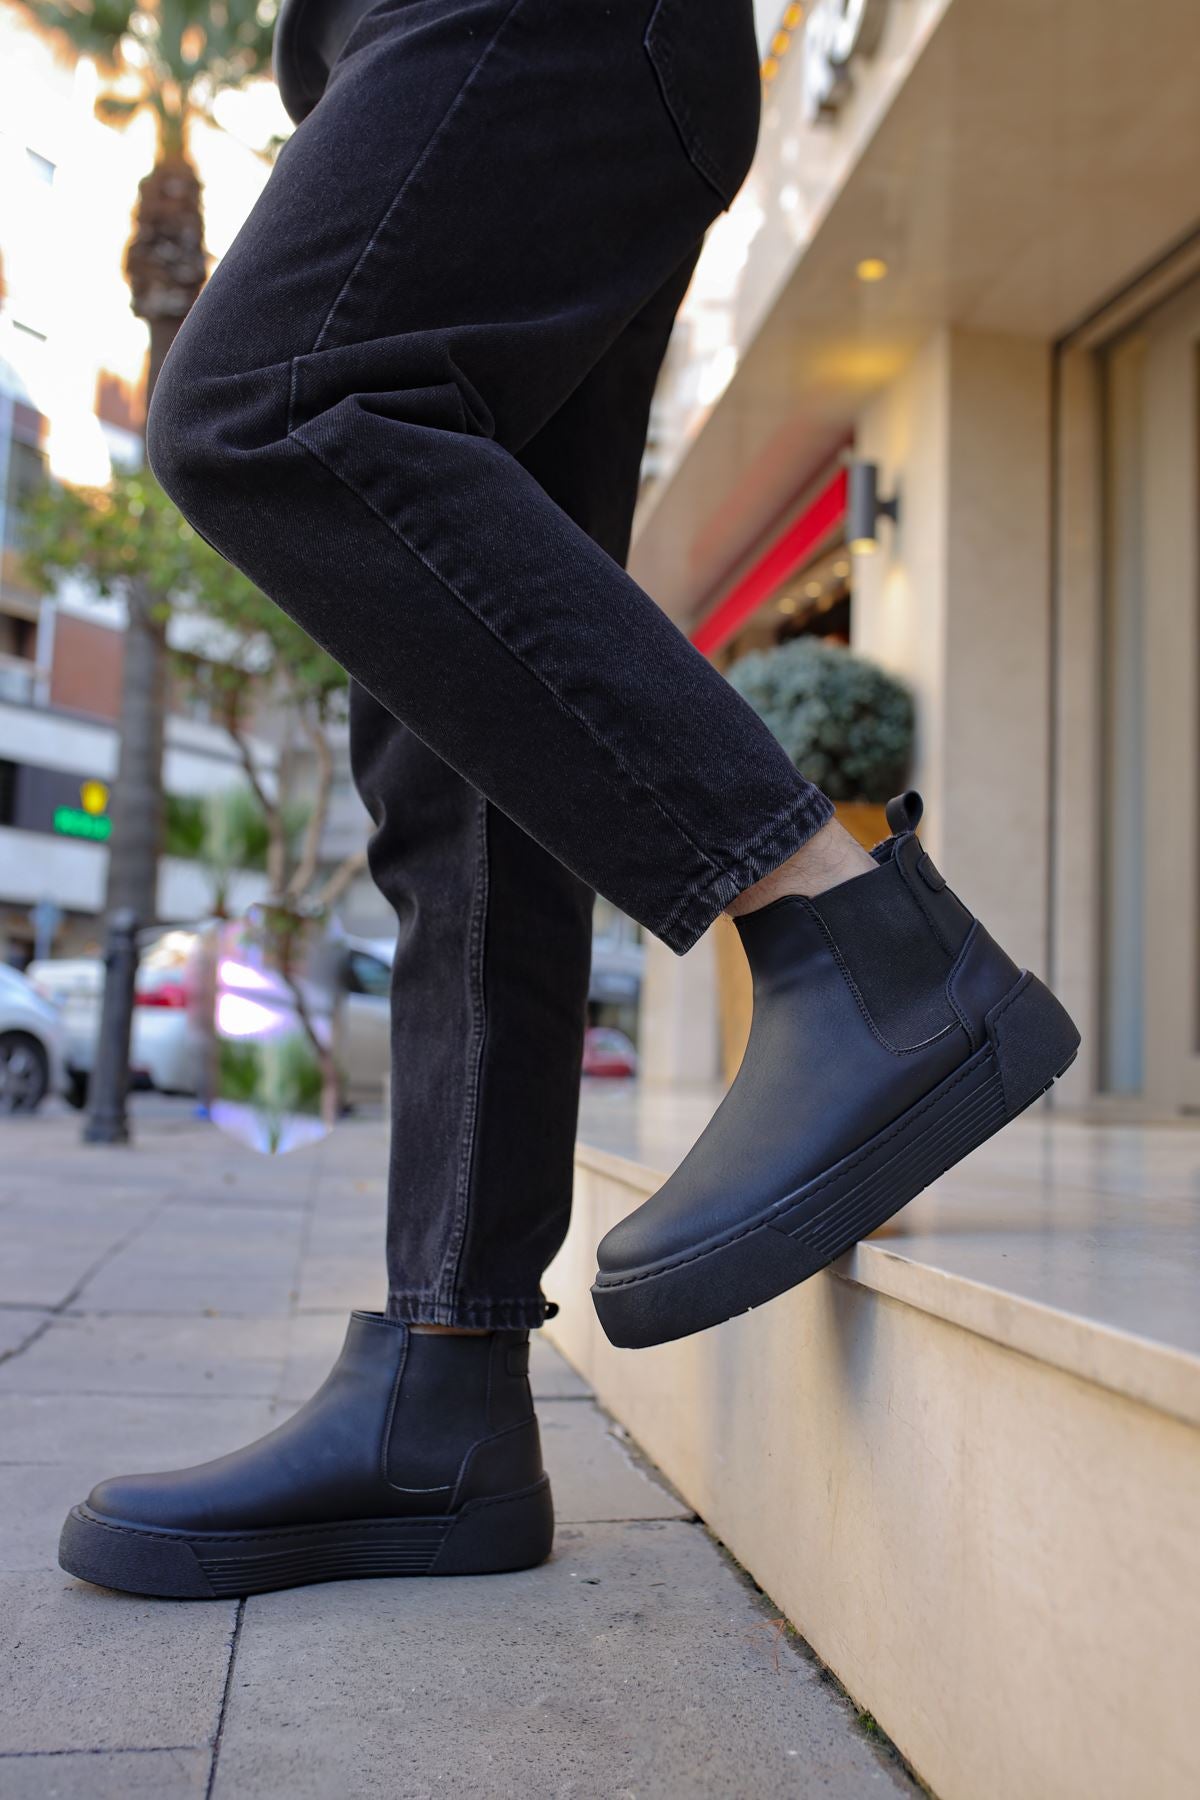 CH069 Men's Boots BLACK - STREETMODE ™